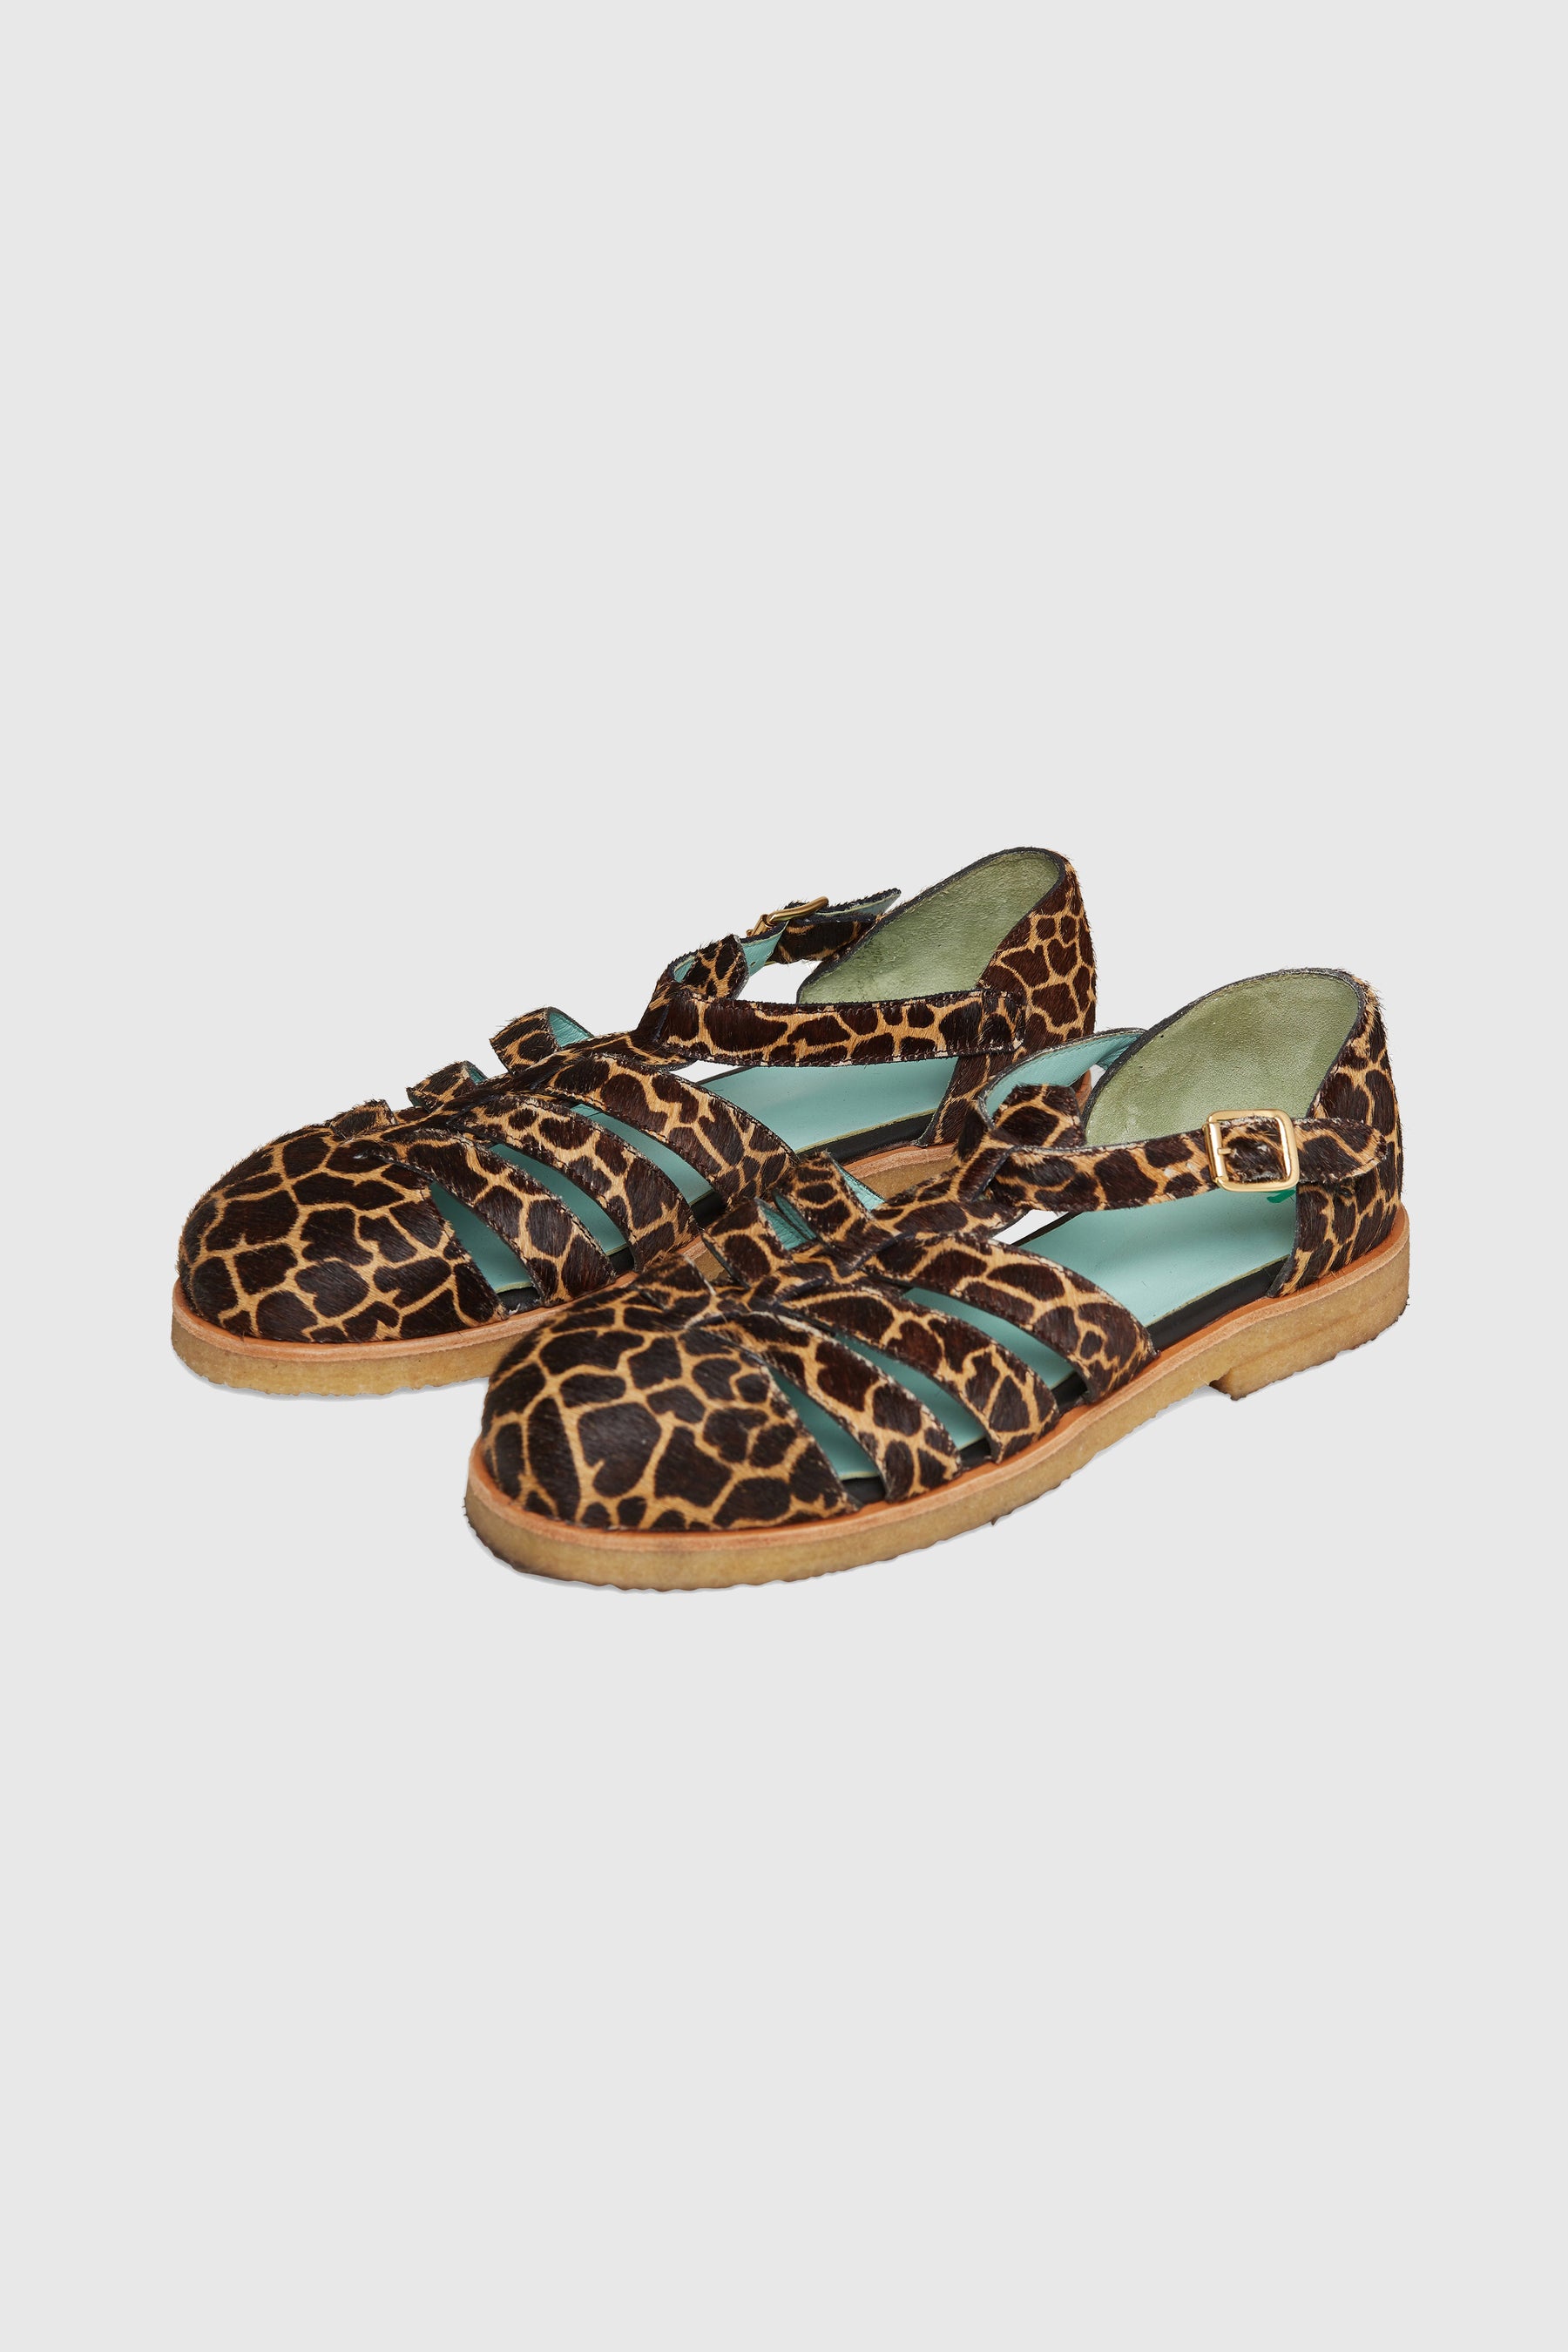 Ricky sandals in giraffe printed leather